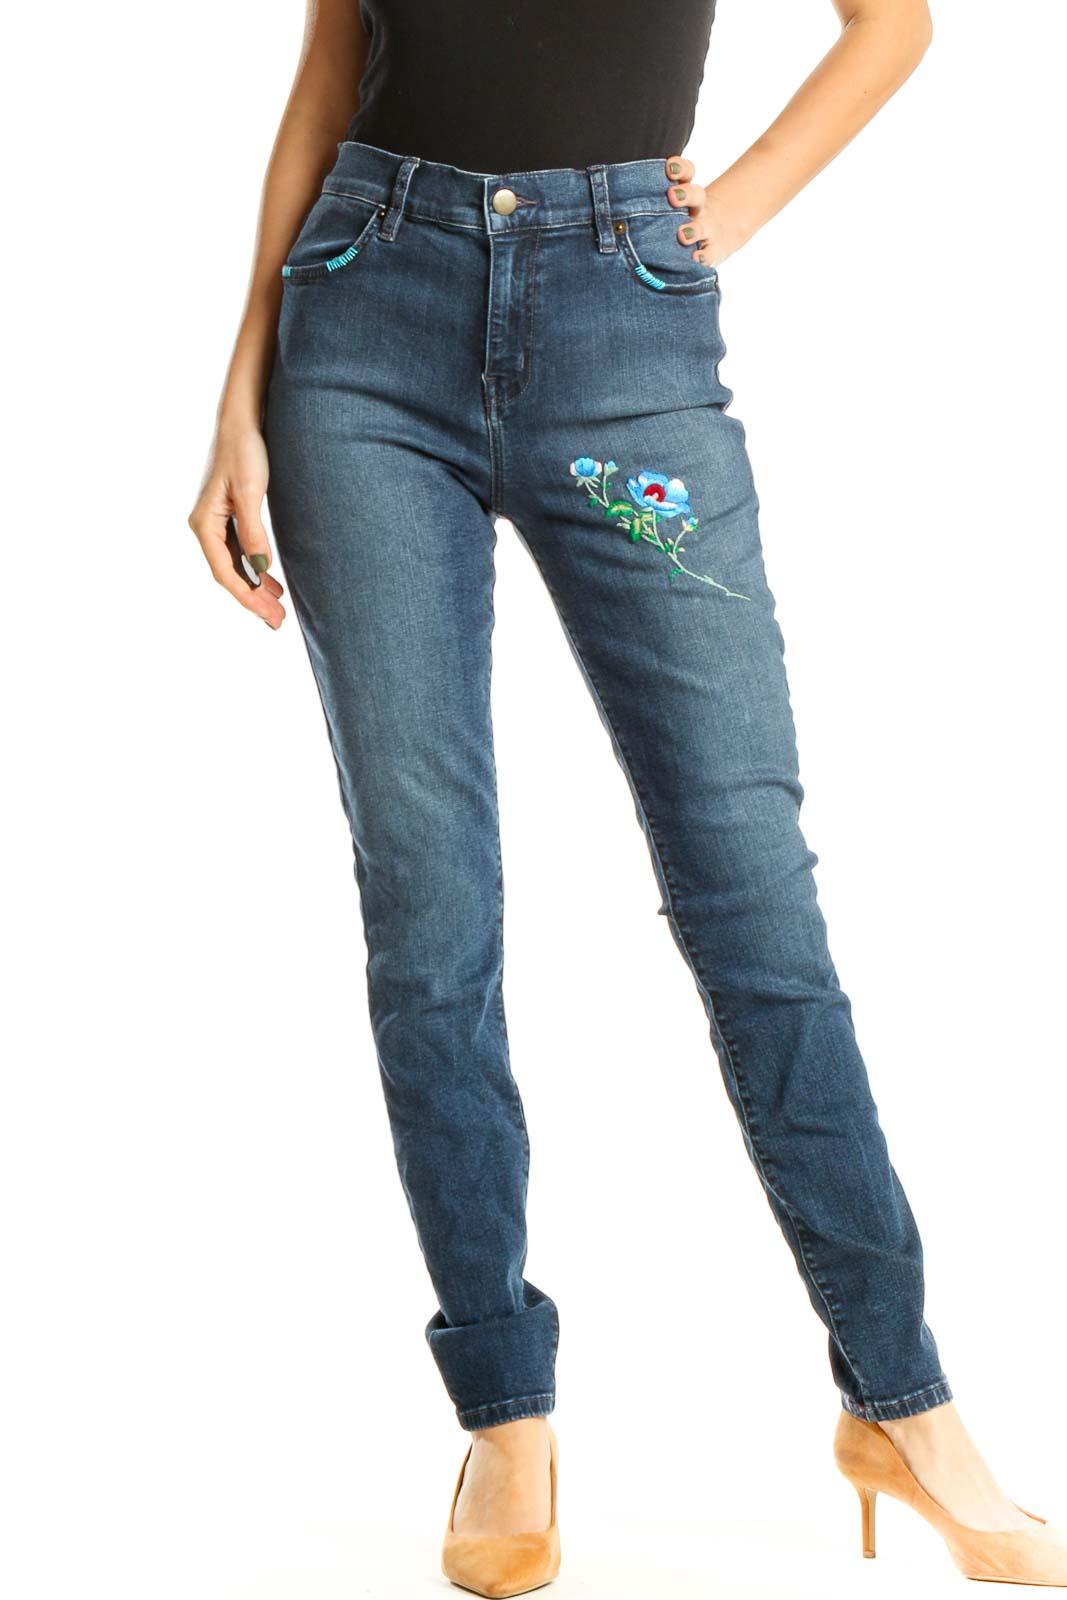 Reworked: Hand Embroidered Jeans with Blue Flowers Front